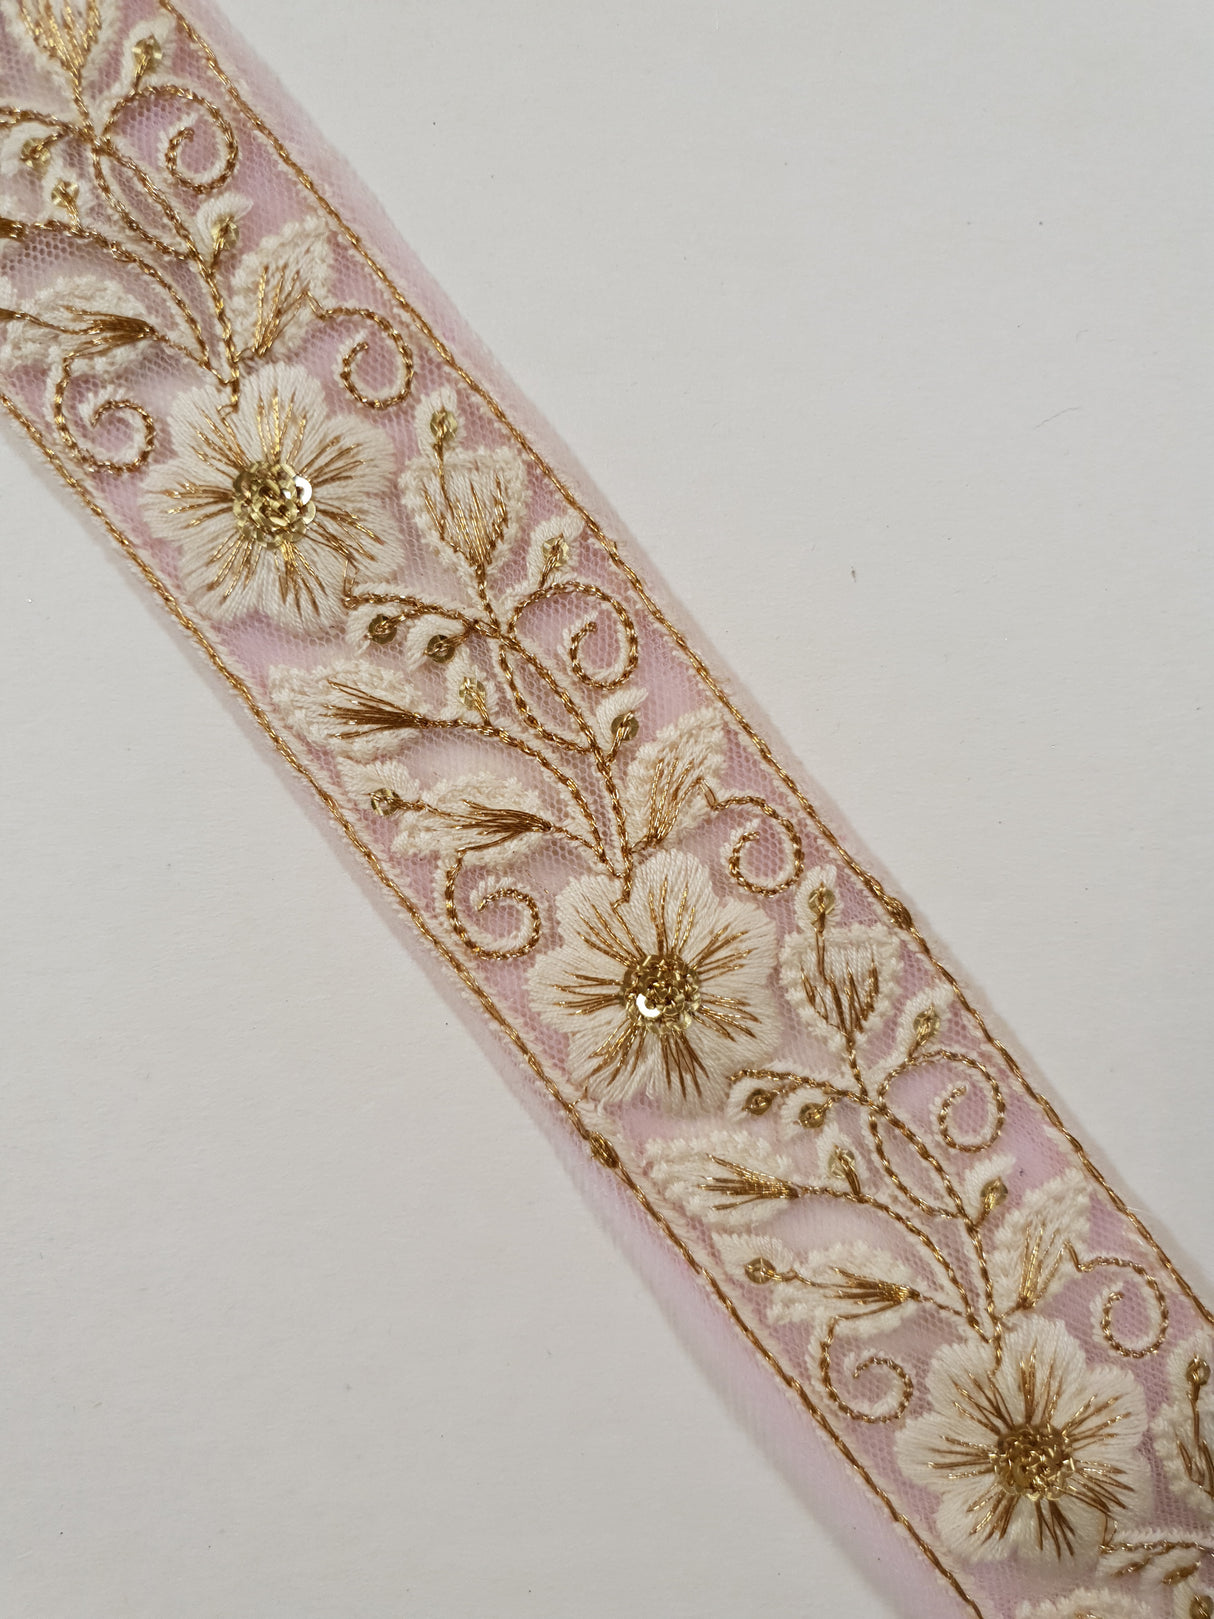 Embroidered Trim - ROLL - (ITR-1478)